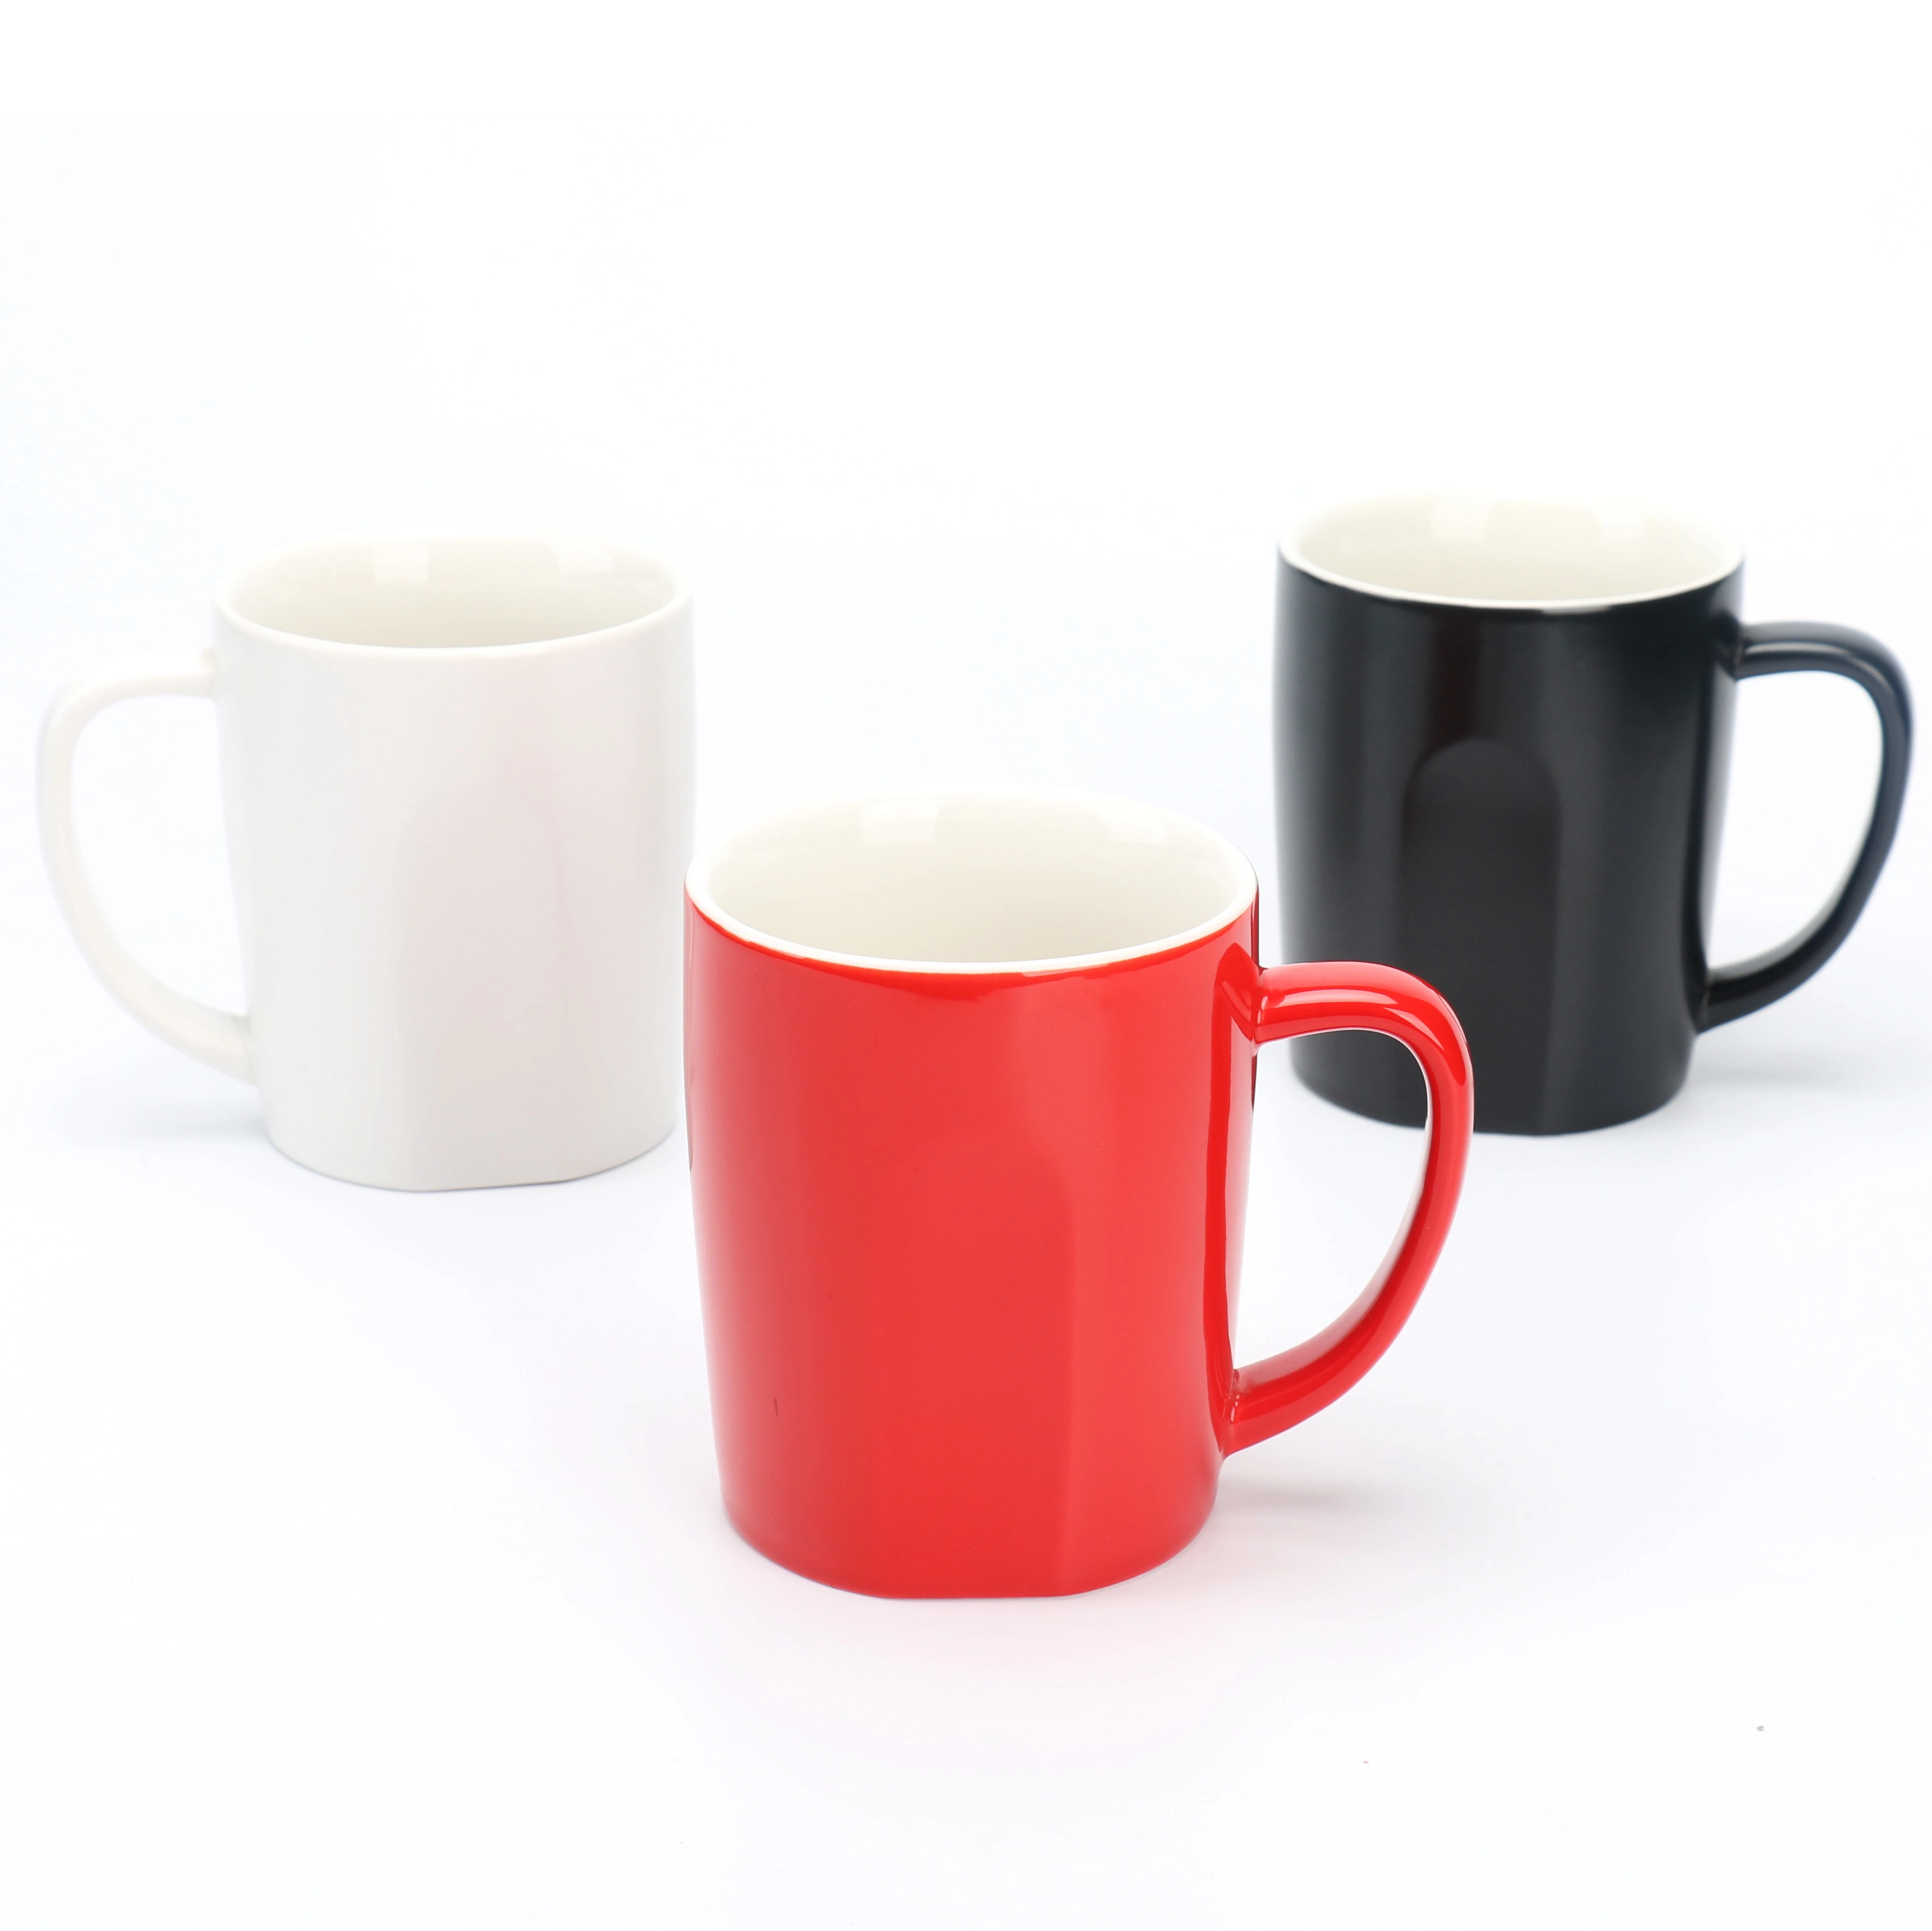 Wholesale Special Ceramic Coffee Cup with Handgrip porcelain mug/cup